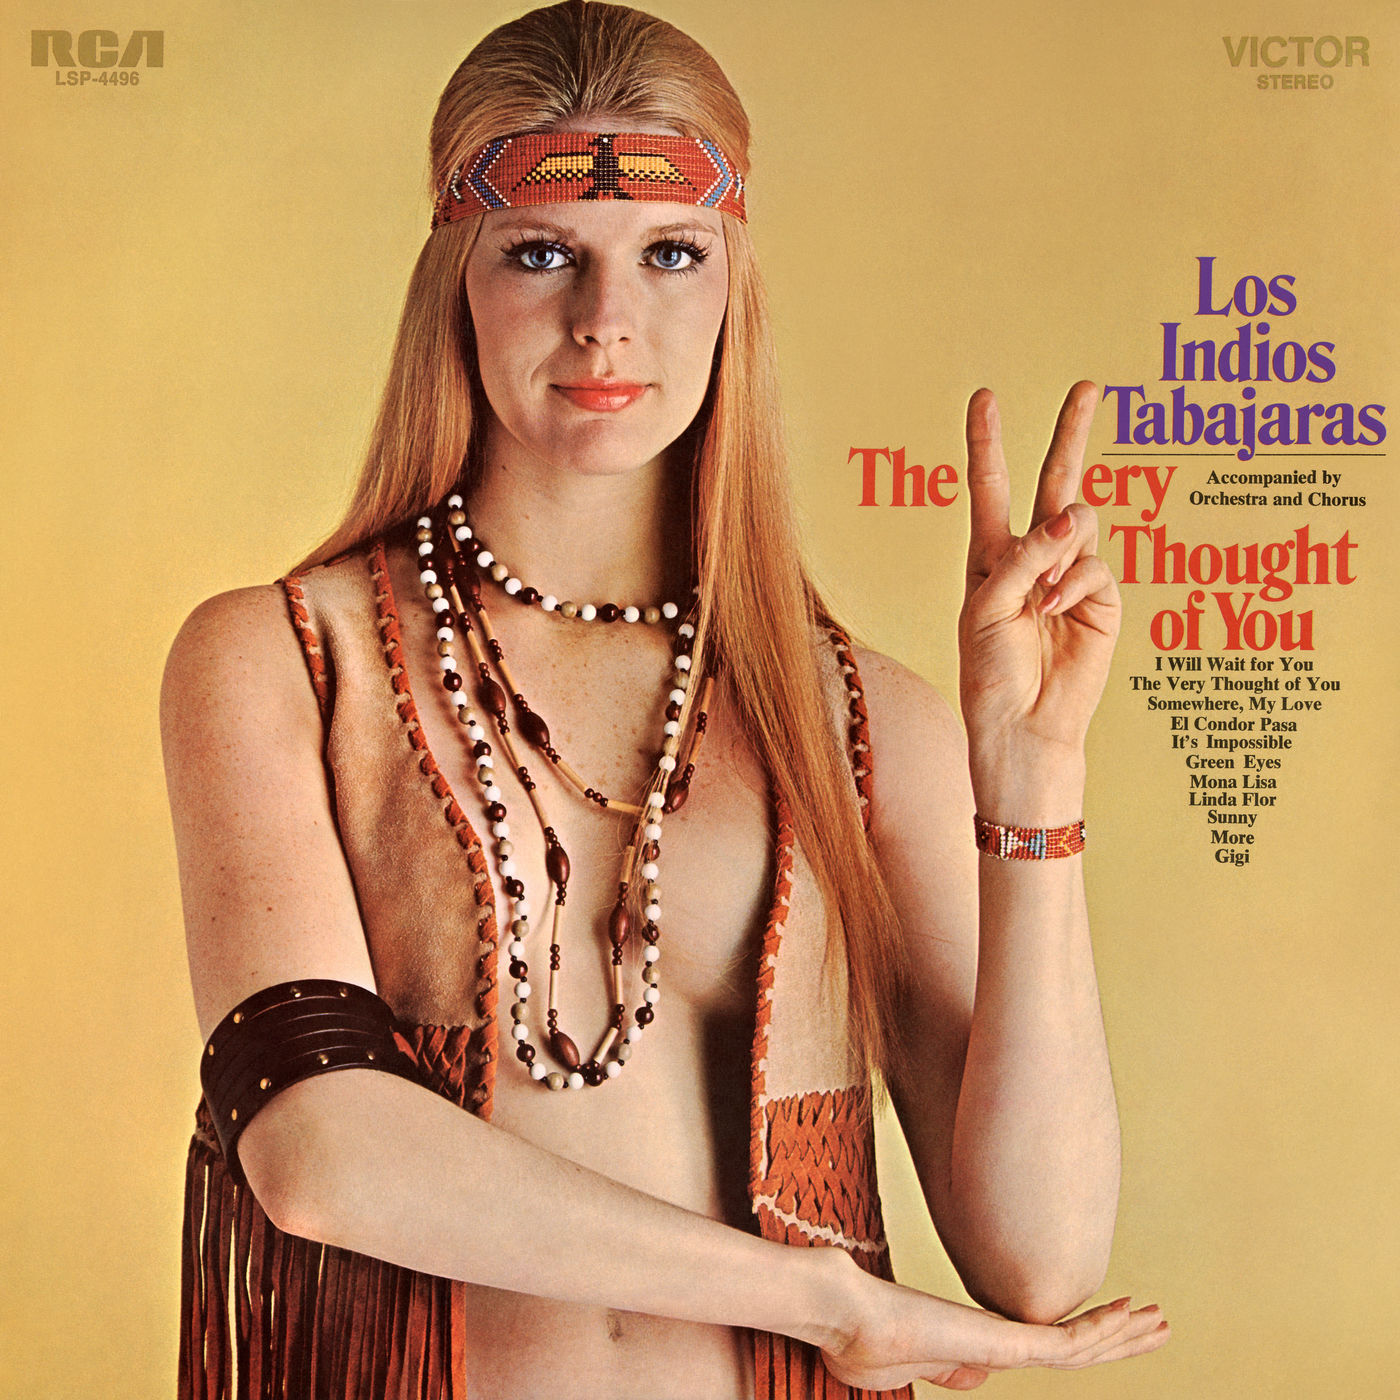 Los Indios Tabajaras - The Very Thought of You (1971/2021) [FLAC 24bit/192kHz]